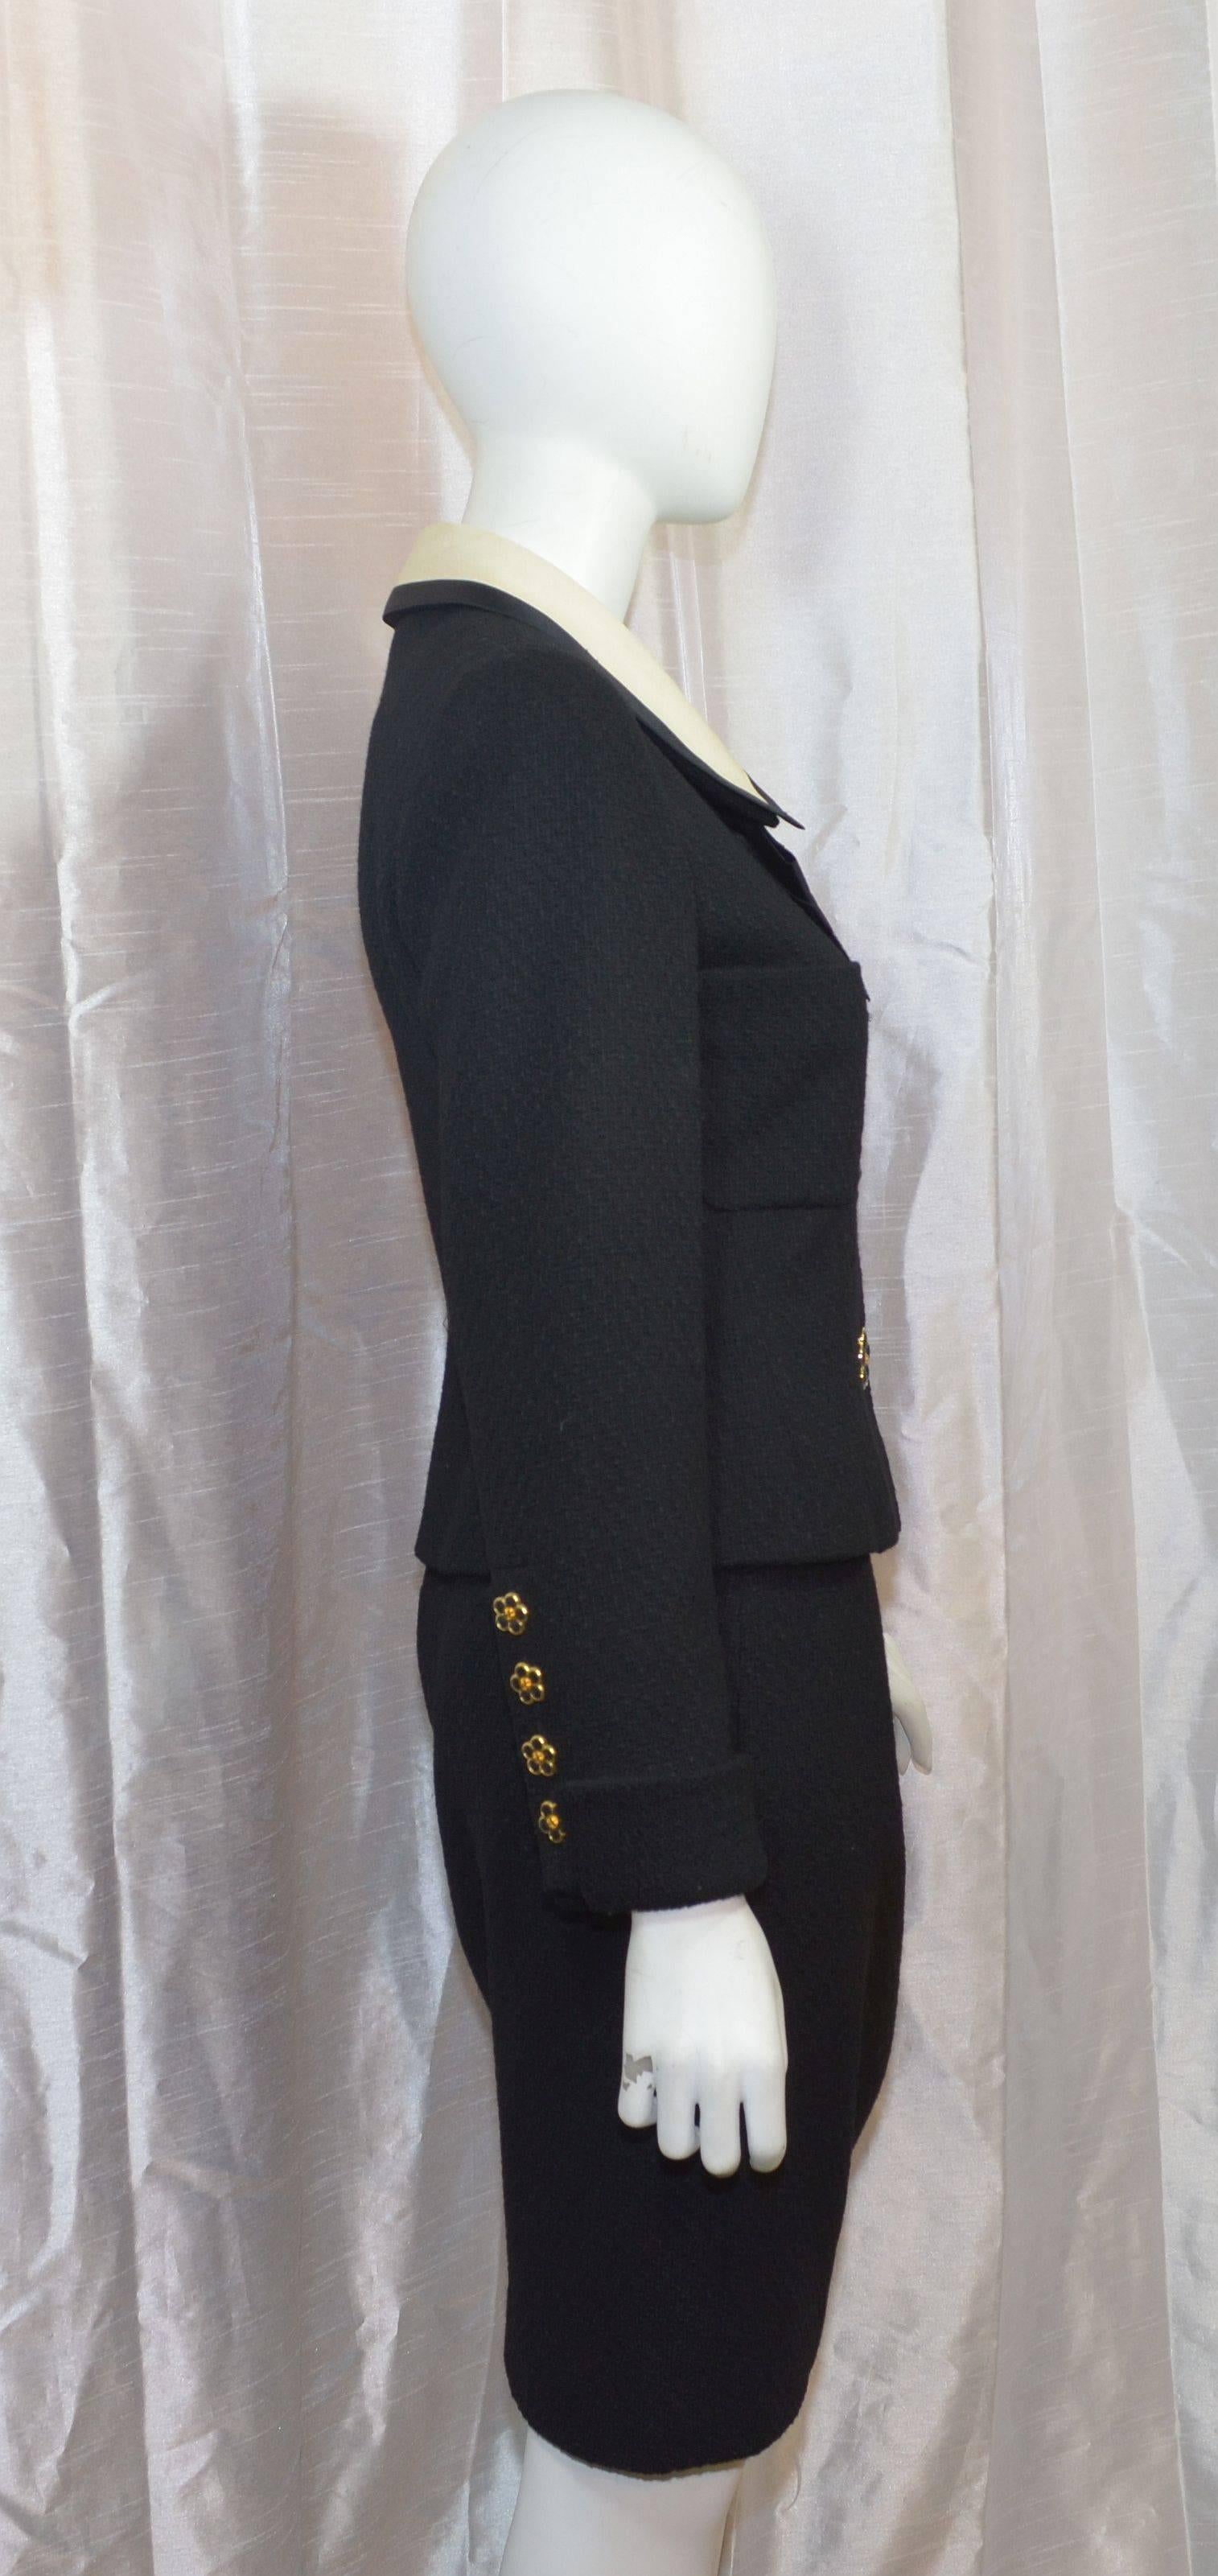 Chanel skirt suit from collection 25 from 1991. Suit jacket features gold-tone and black flower button closures along the front and on the cuffs, two slip pockets at the bust, satin bow tie at the neck, and a removable ivory satin collar. Skirt has